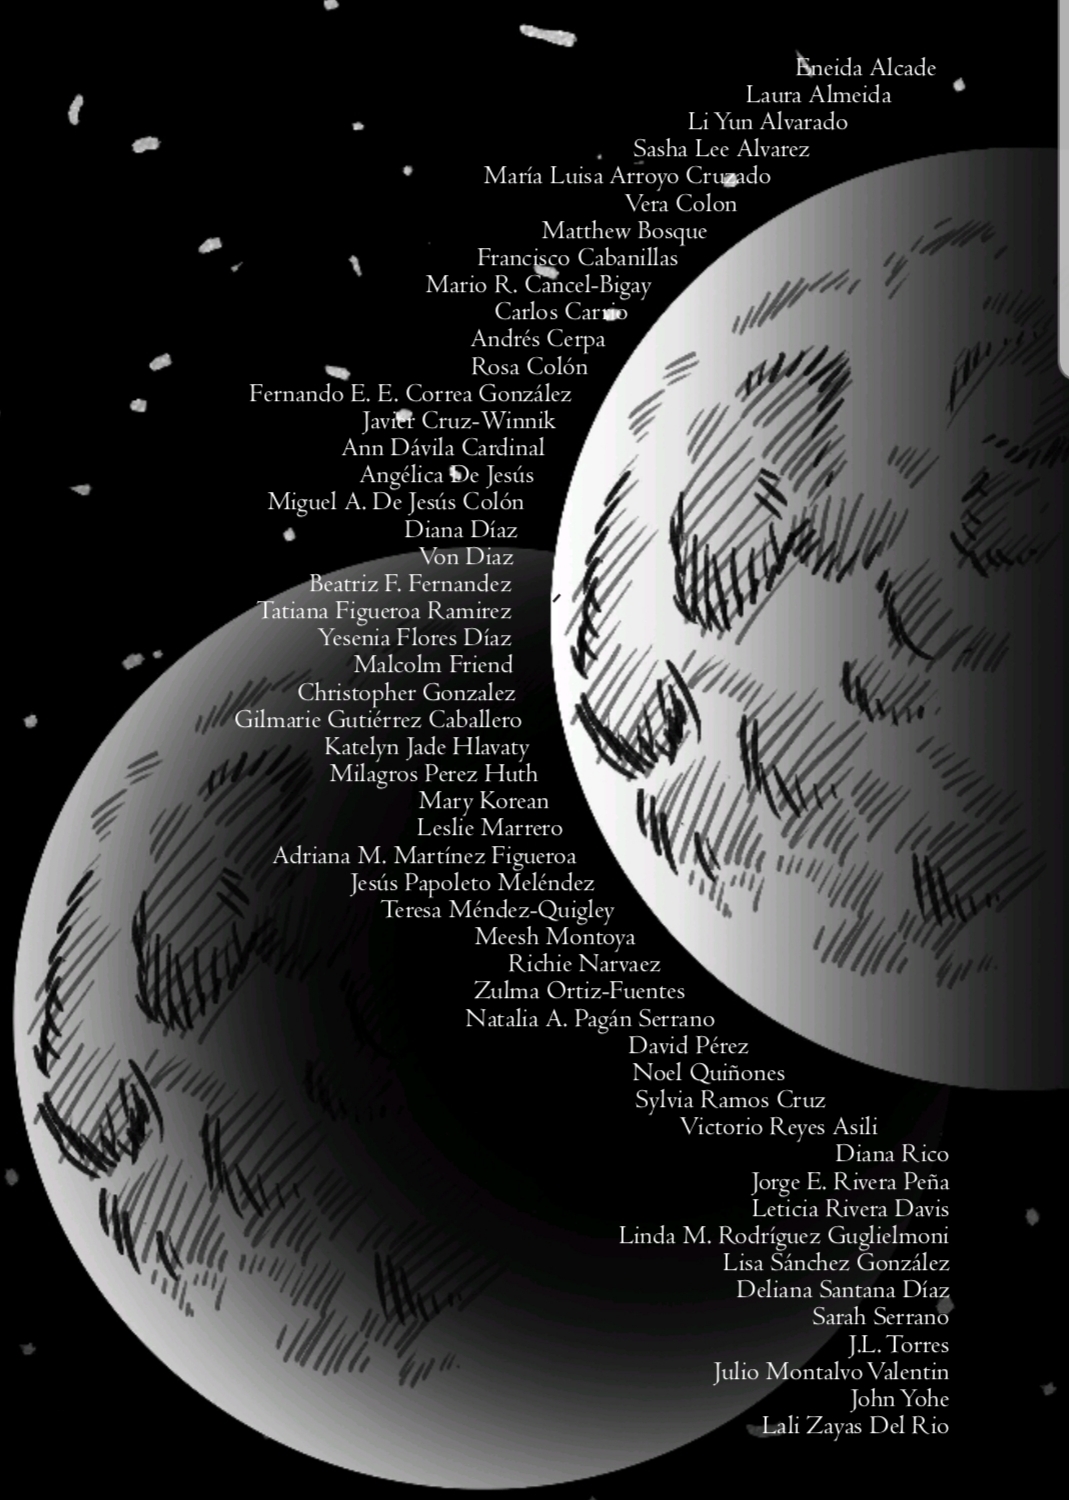 The back cover of the book features another illustration of the moon, plus contributor names